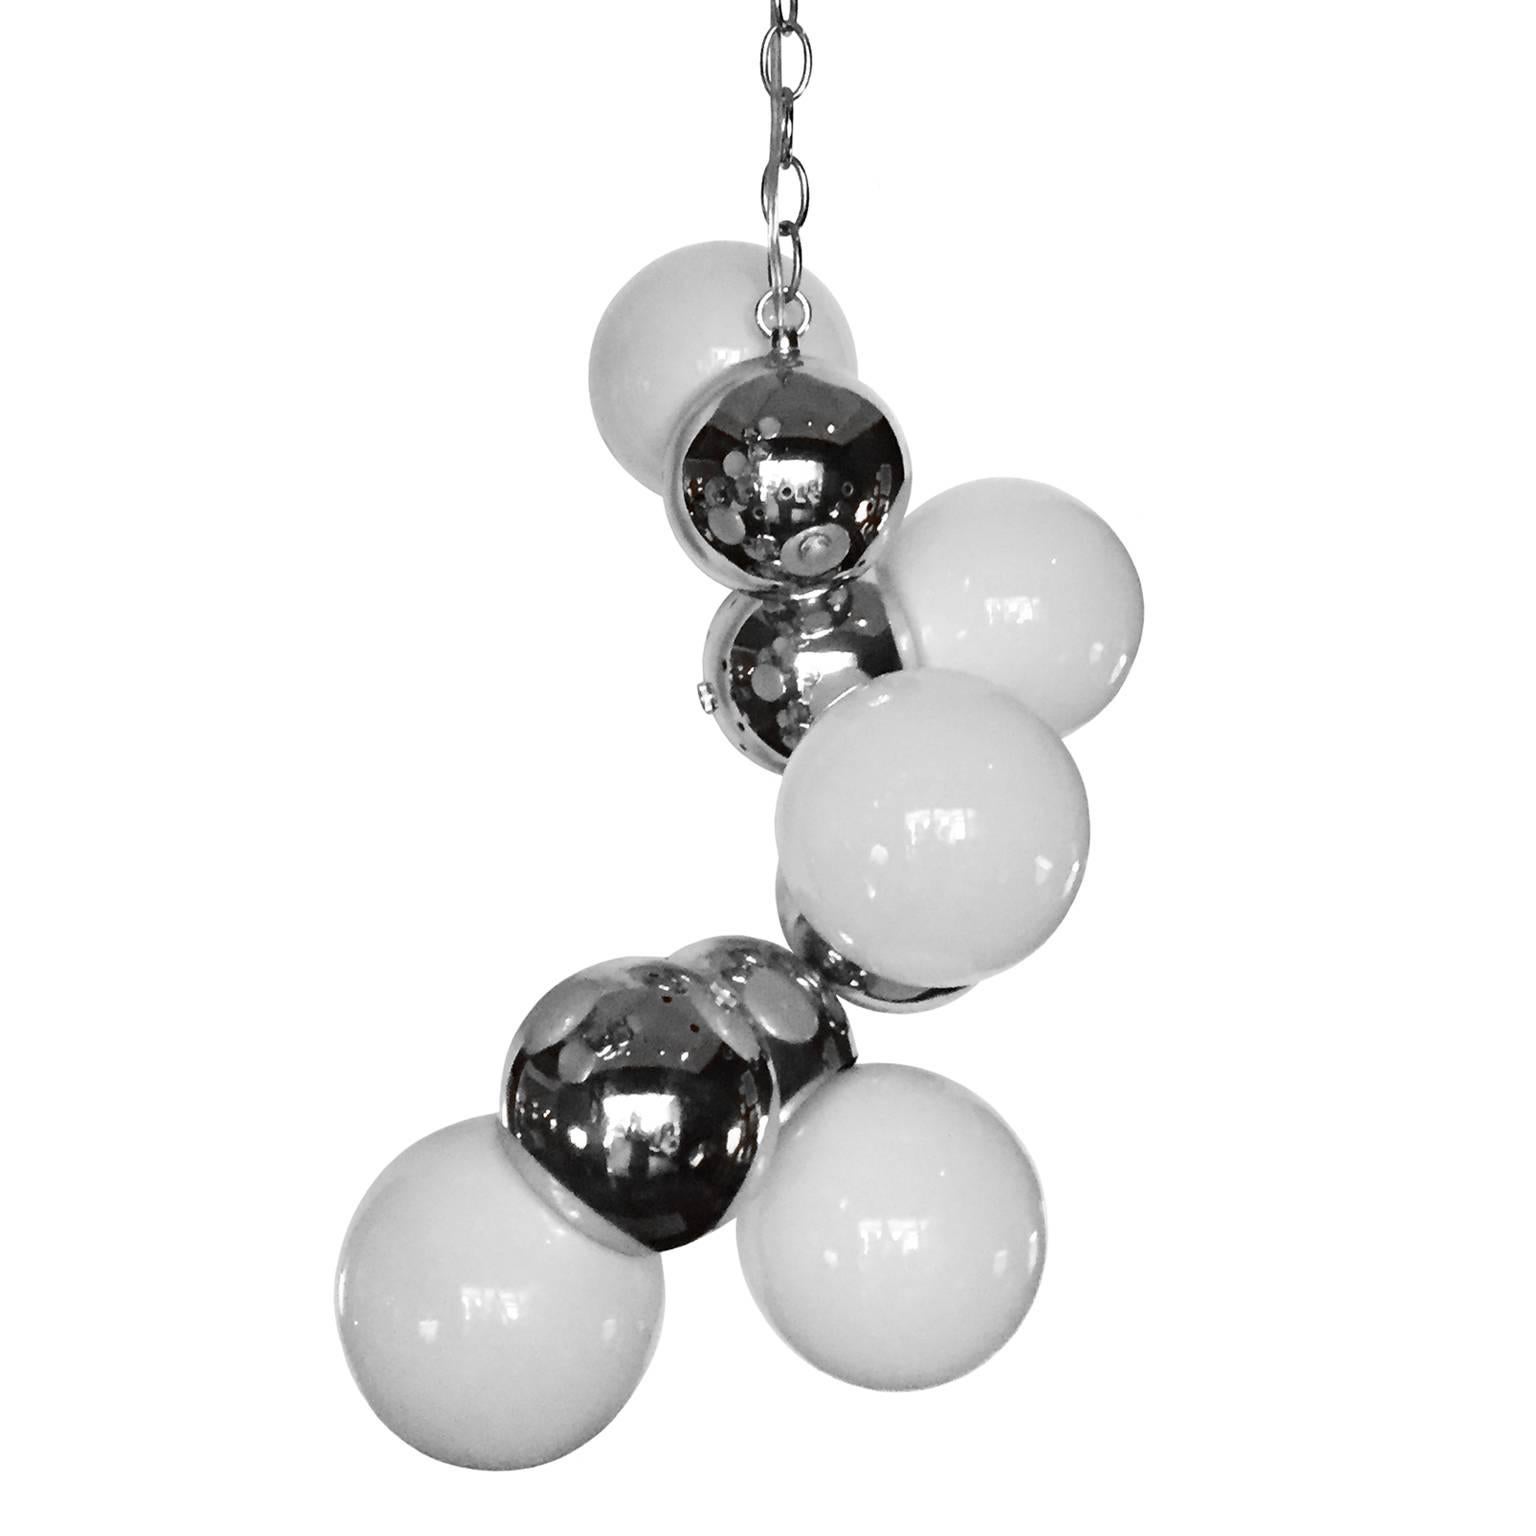 1970s Asymmetrical Hanging Chrome and Glass Orb Pendent Light